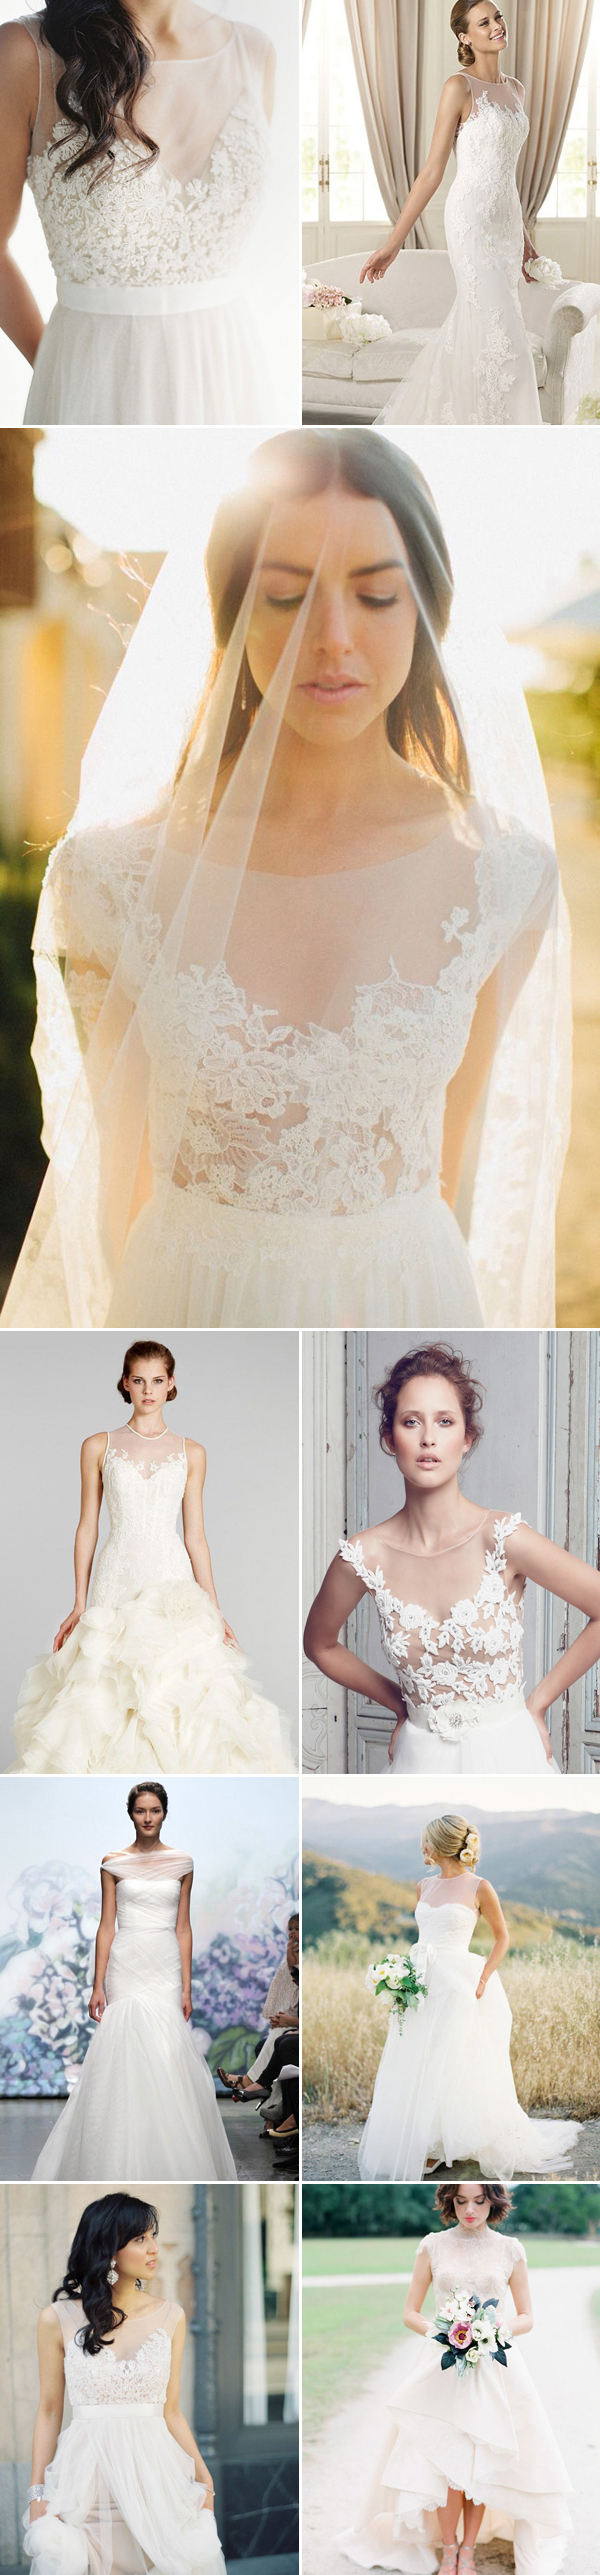 sheer illusion wedding gowns and dresses